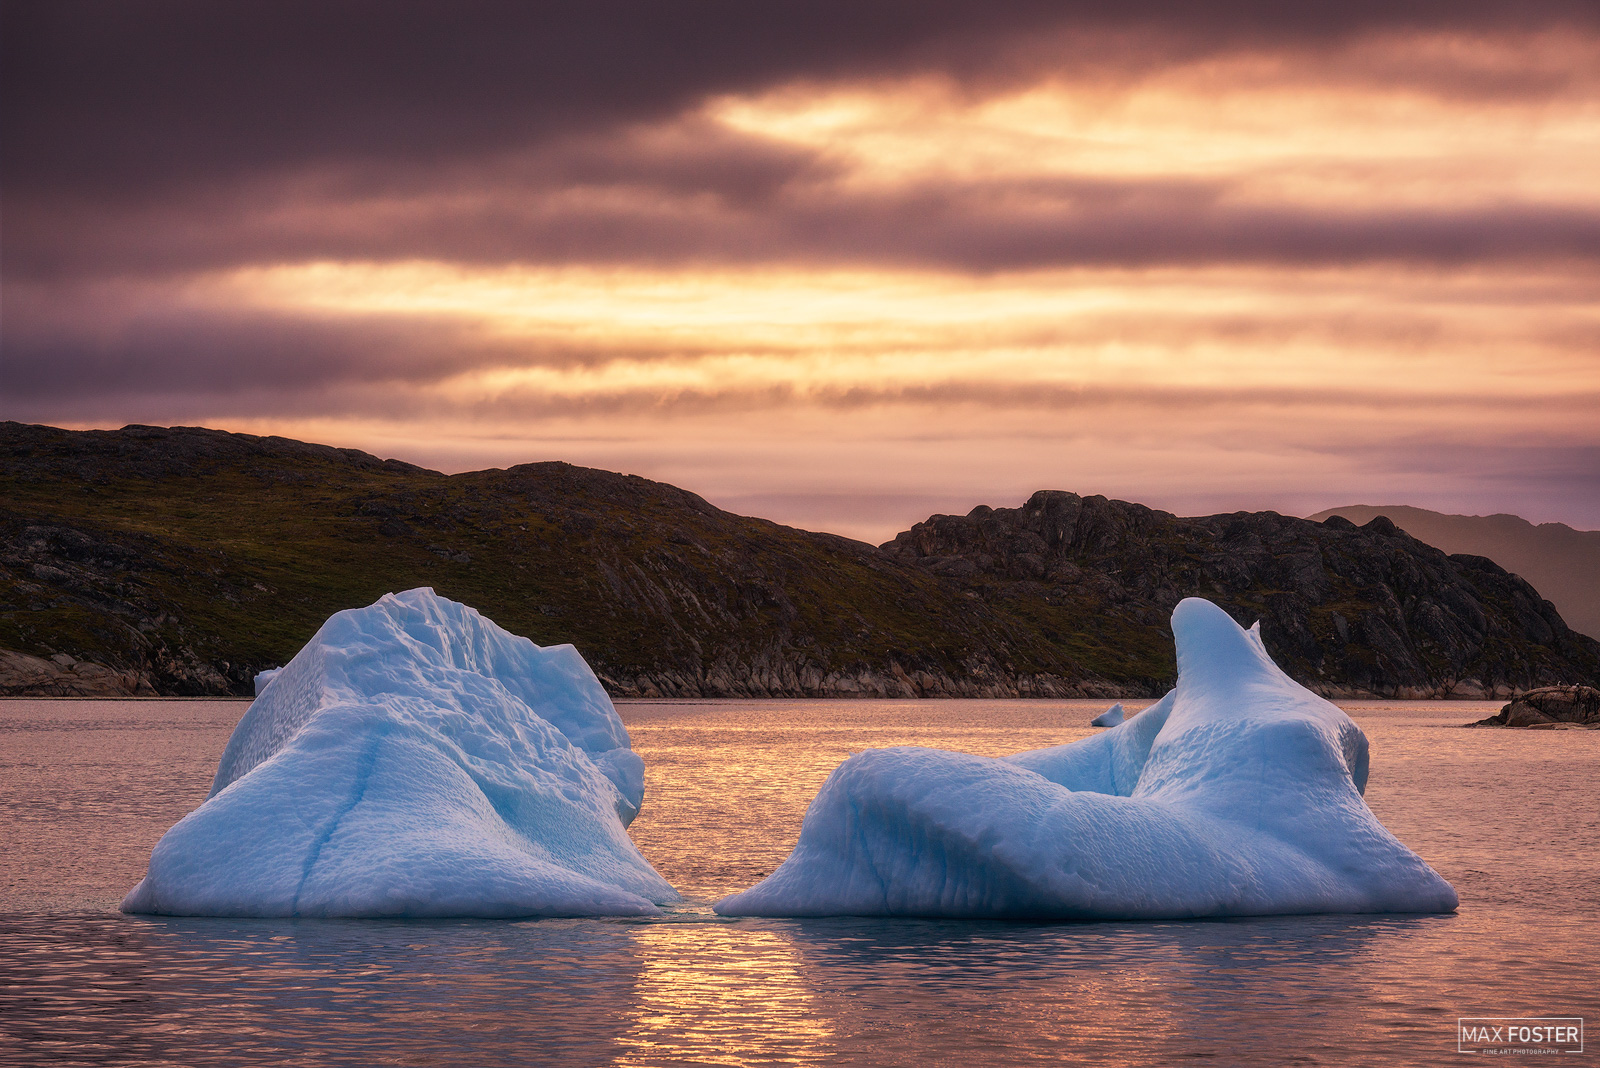 Bring your walls to life with Fire And Ice, Max Foster's limited edition photography print of icebergs in Southern Greenland...